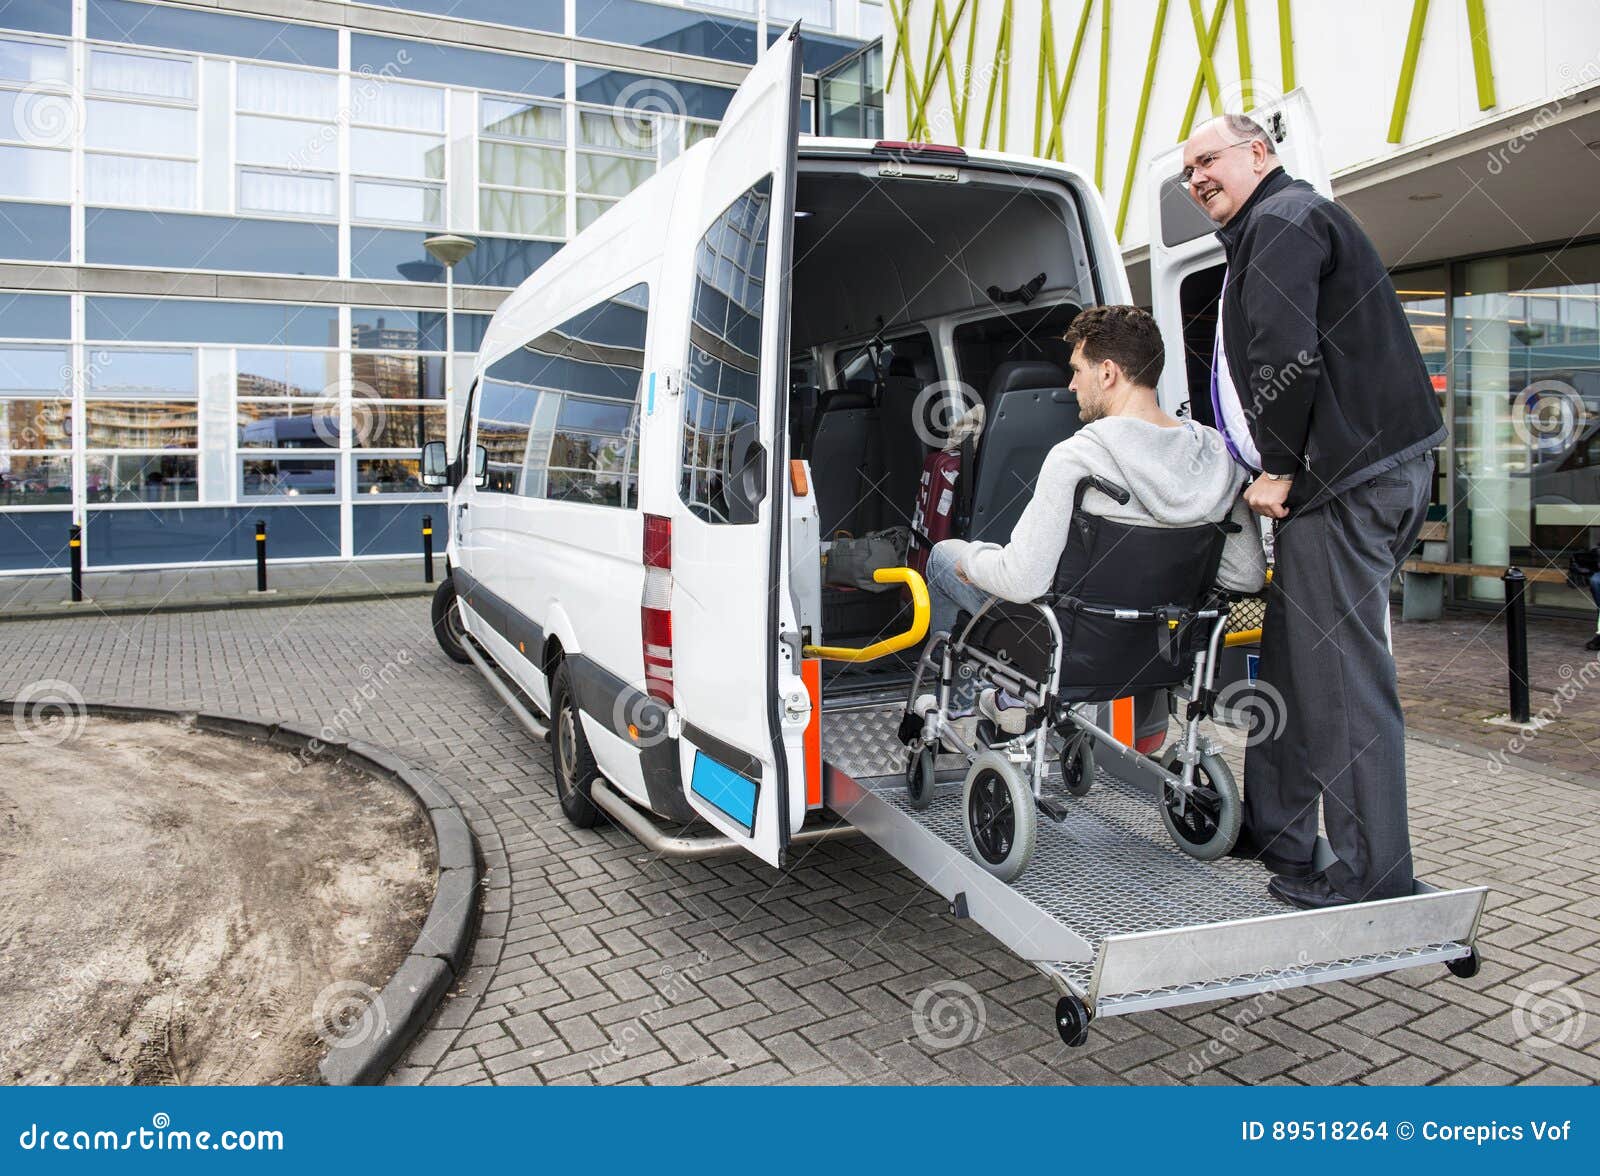 wheelchair taxi pick up